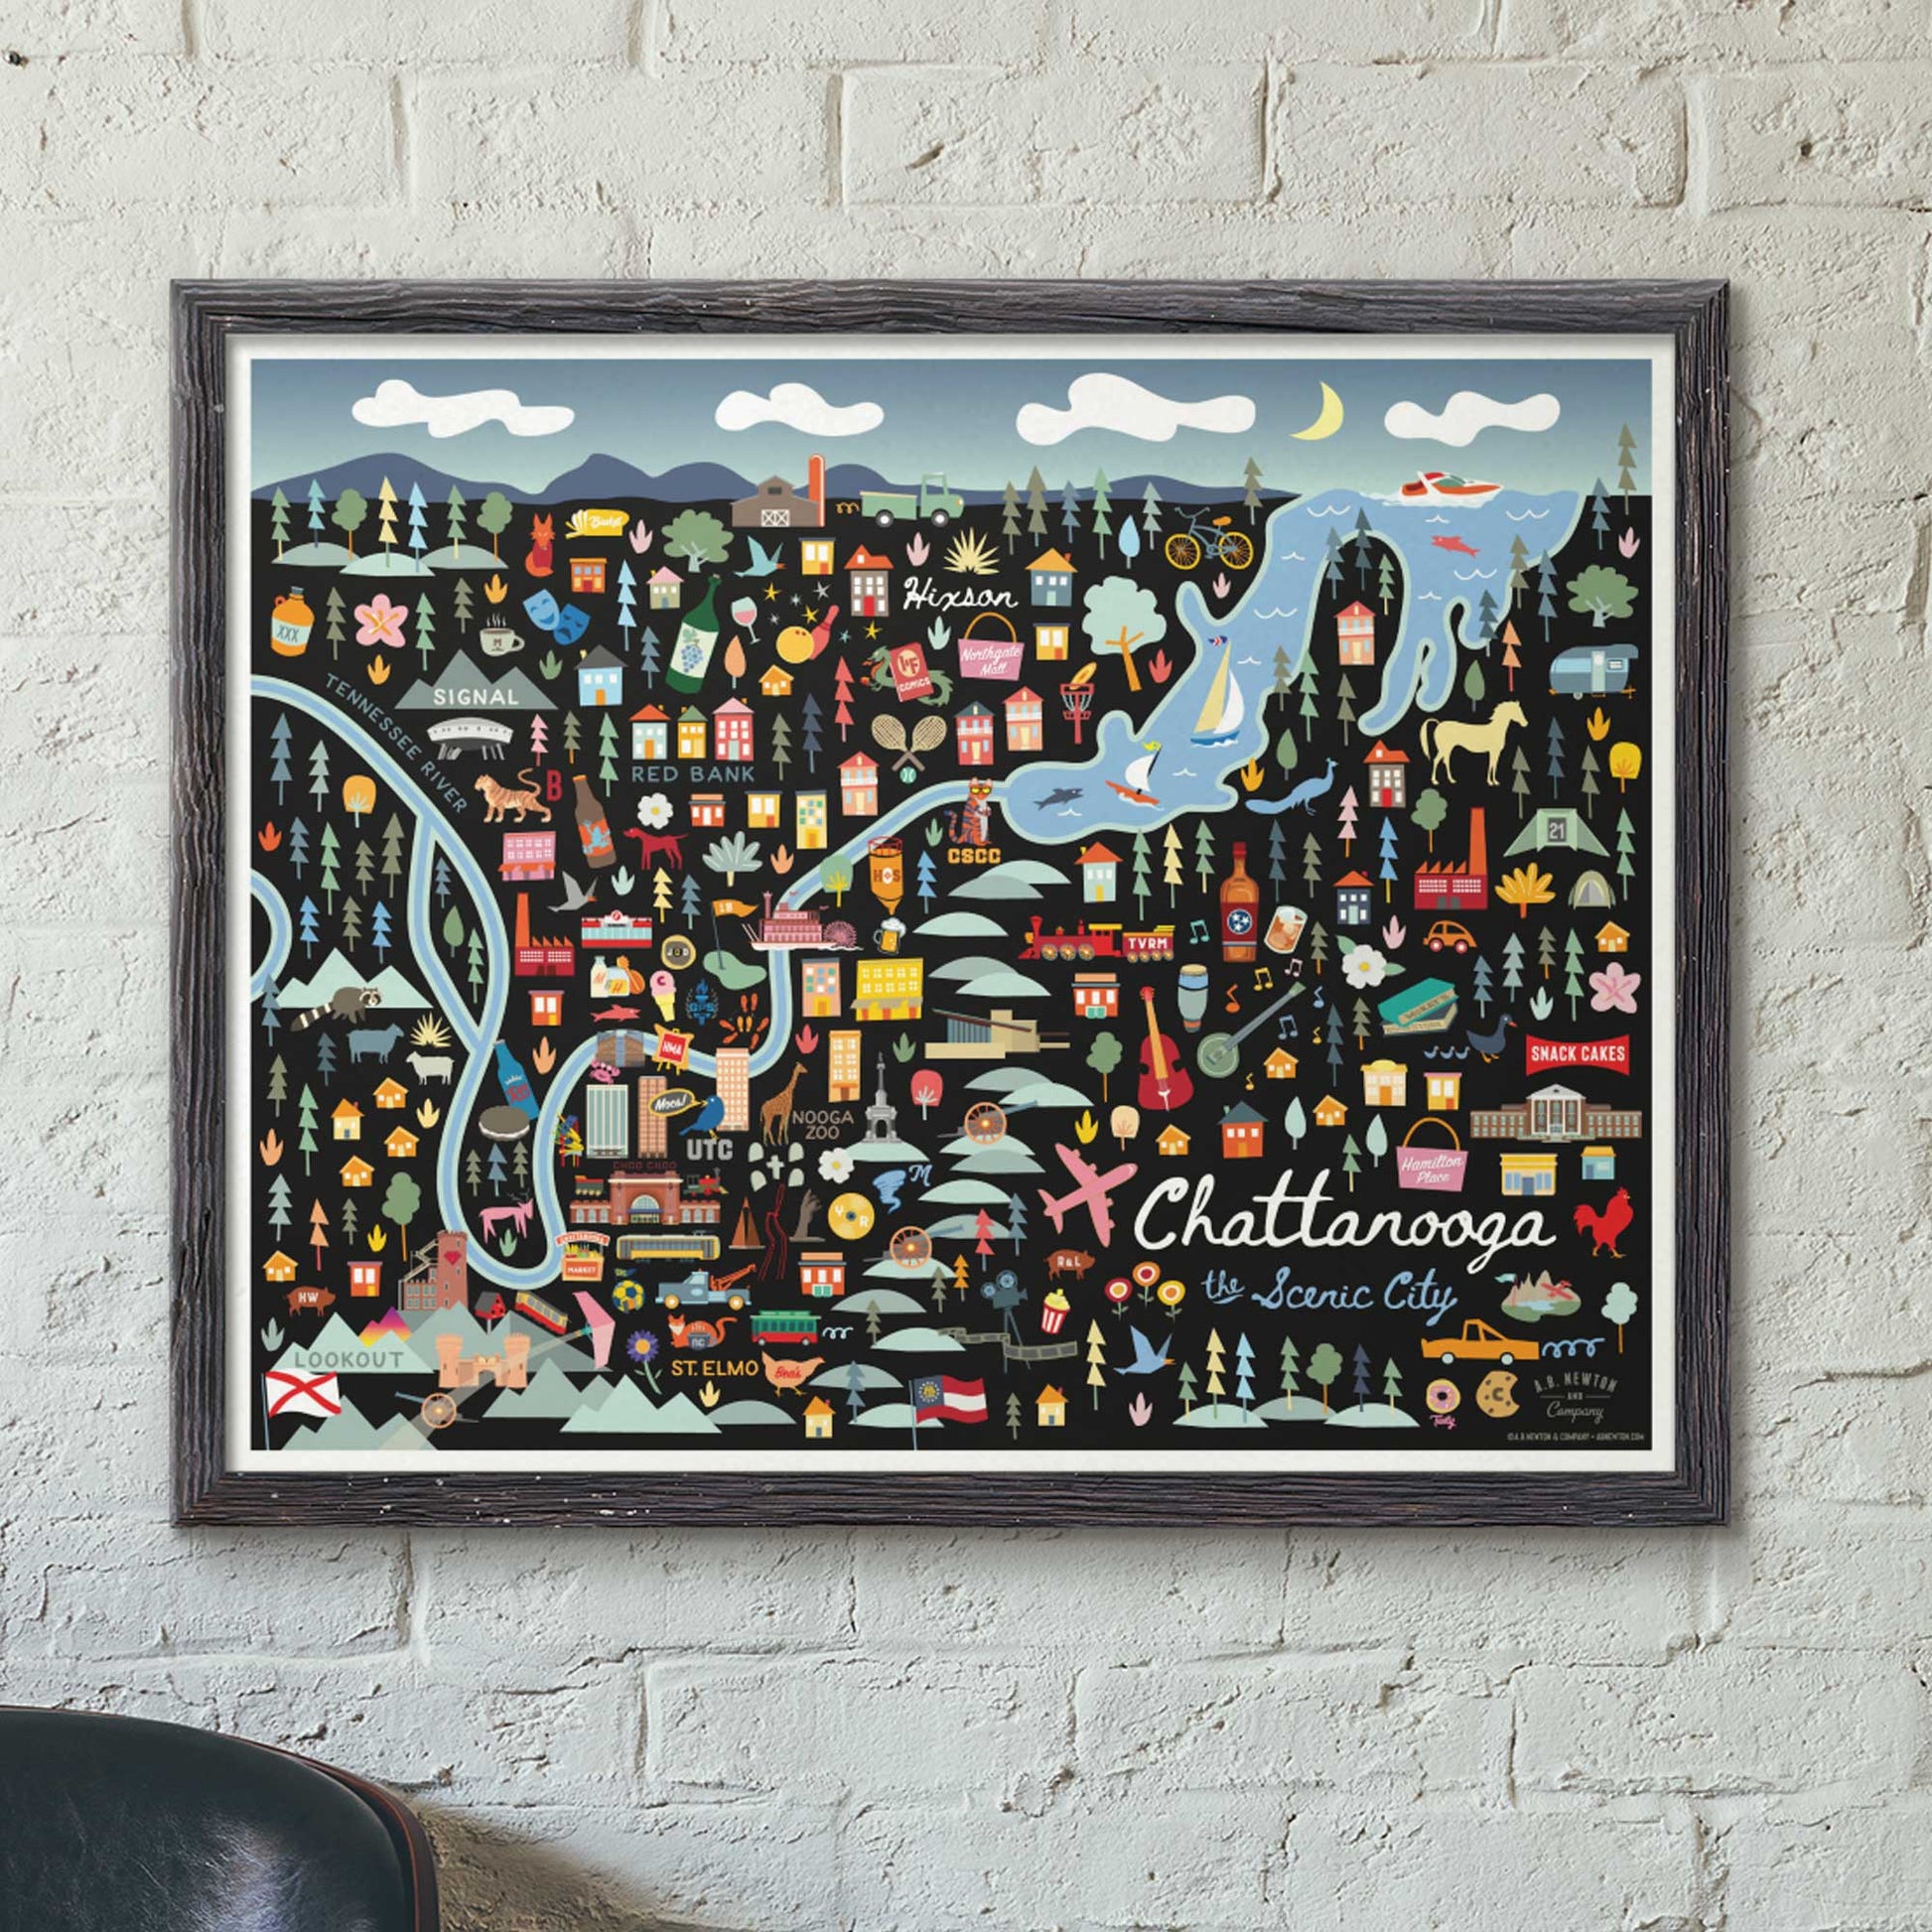 City of Chattanooga Tennessee | City Print Series - A. B. Newton and Company